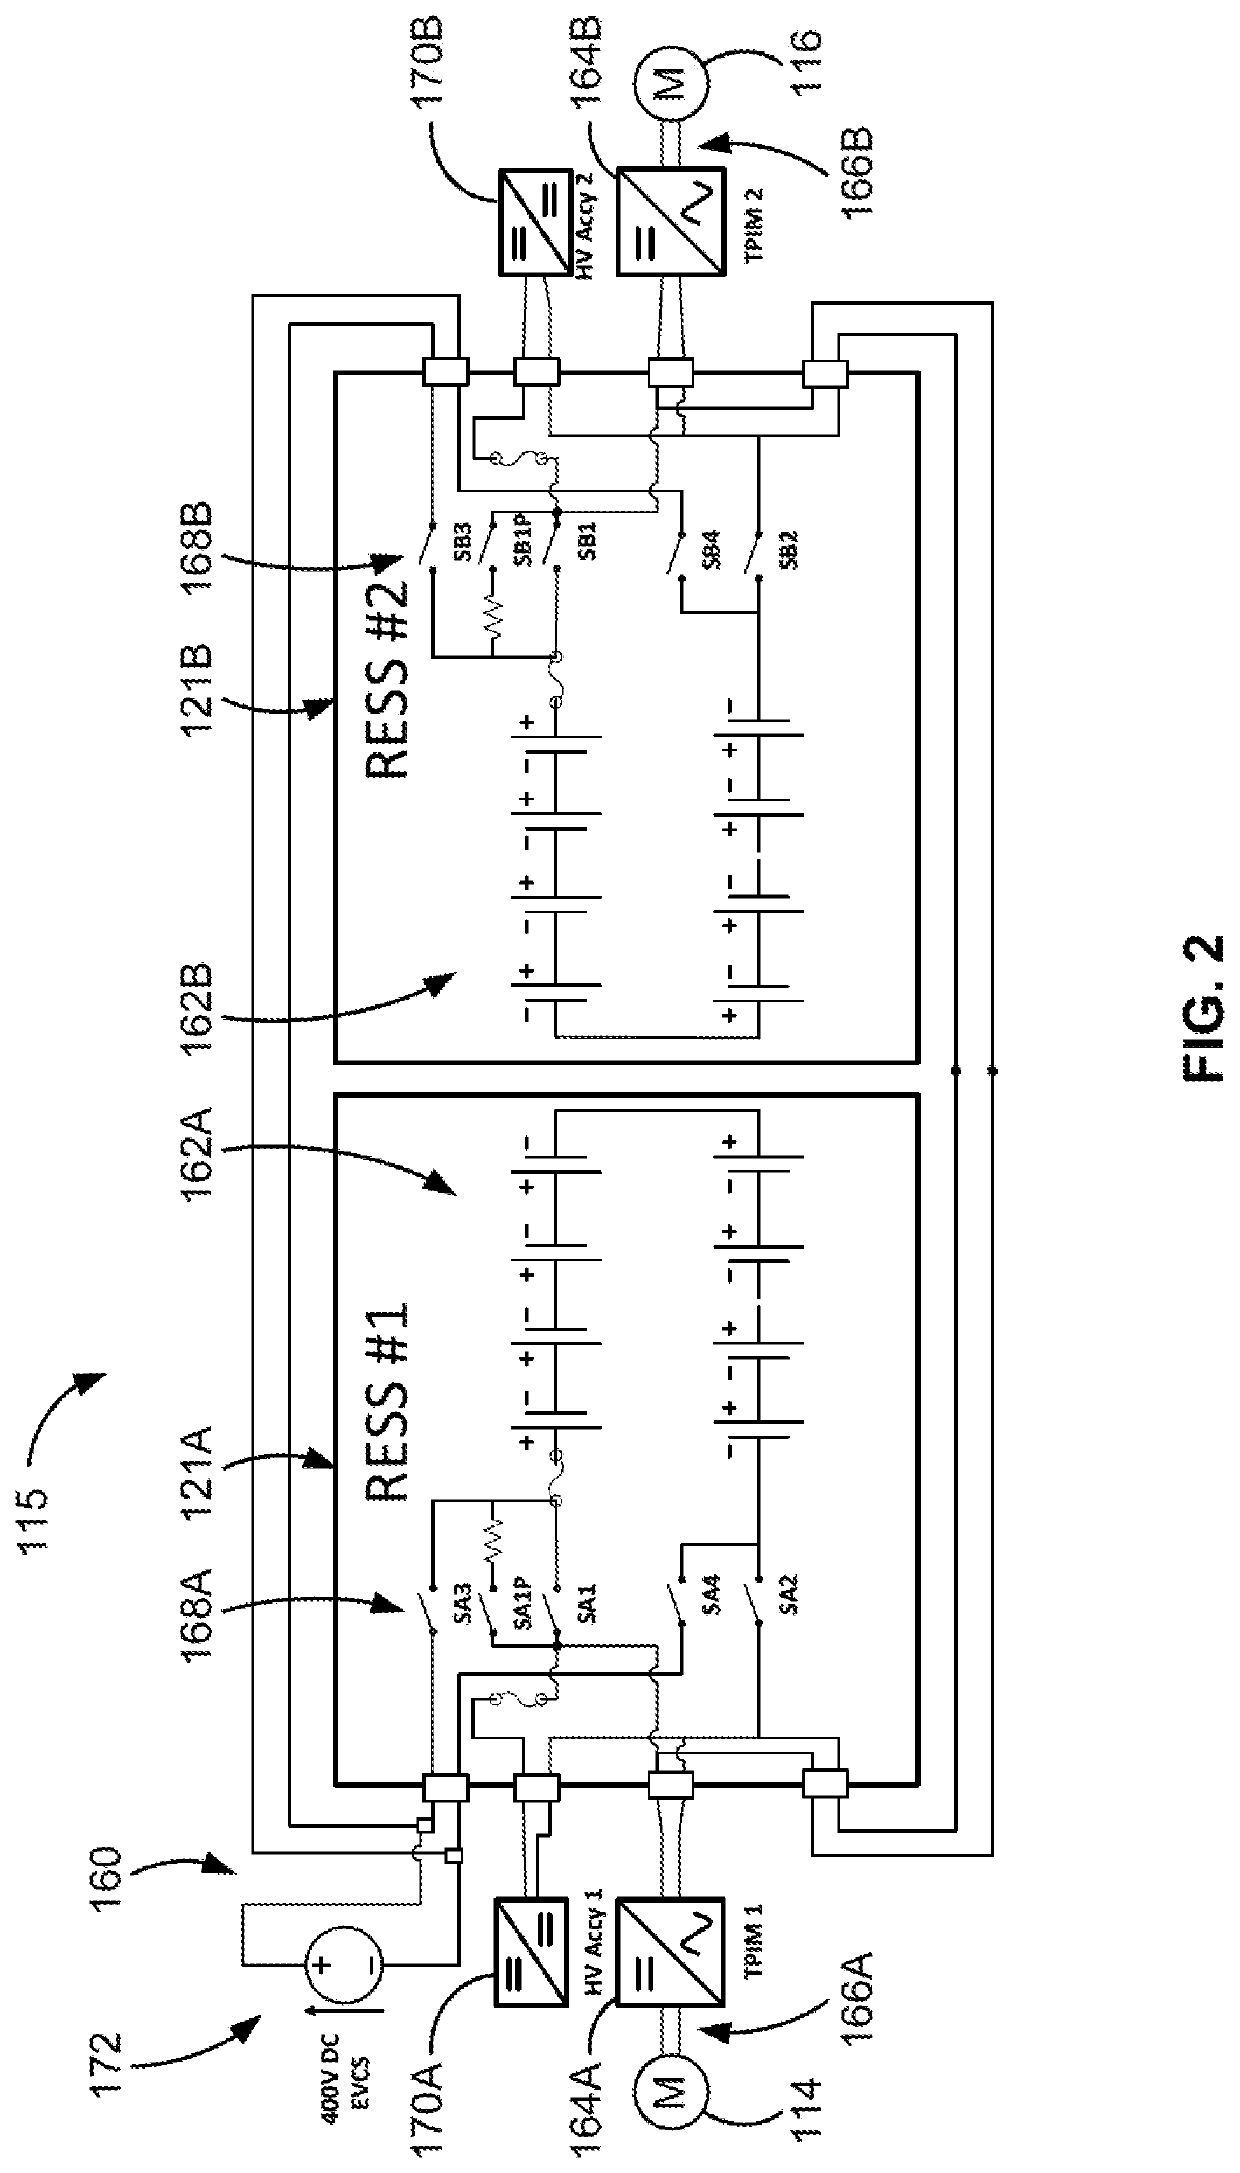 Battery pack balancing systems and control logic for multi-pack electric-drive motor vehicles